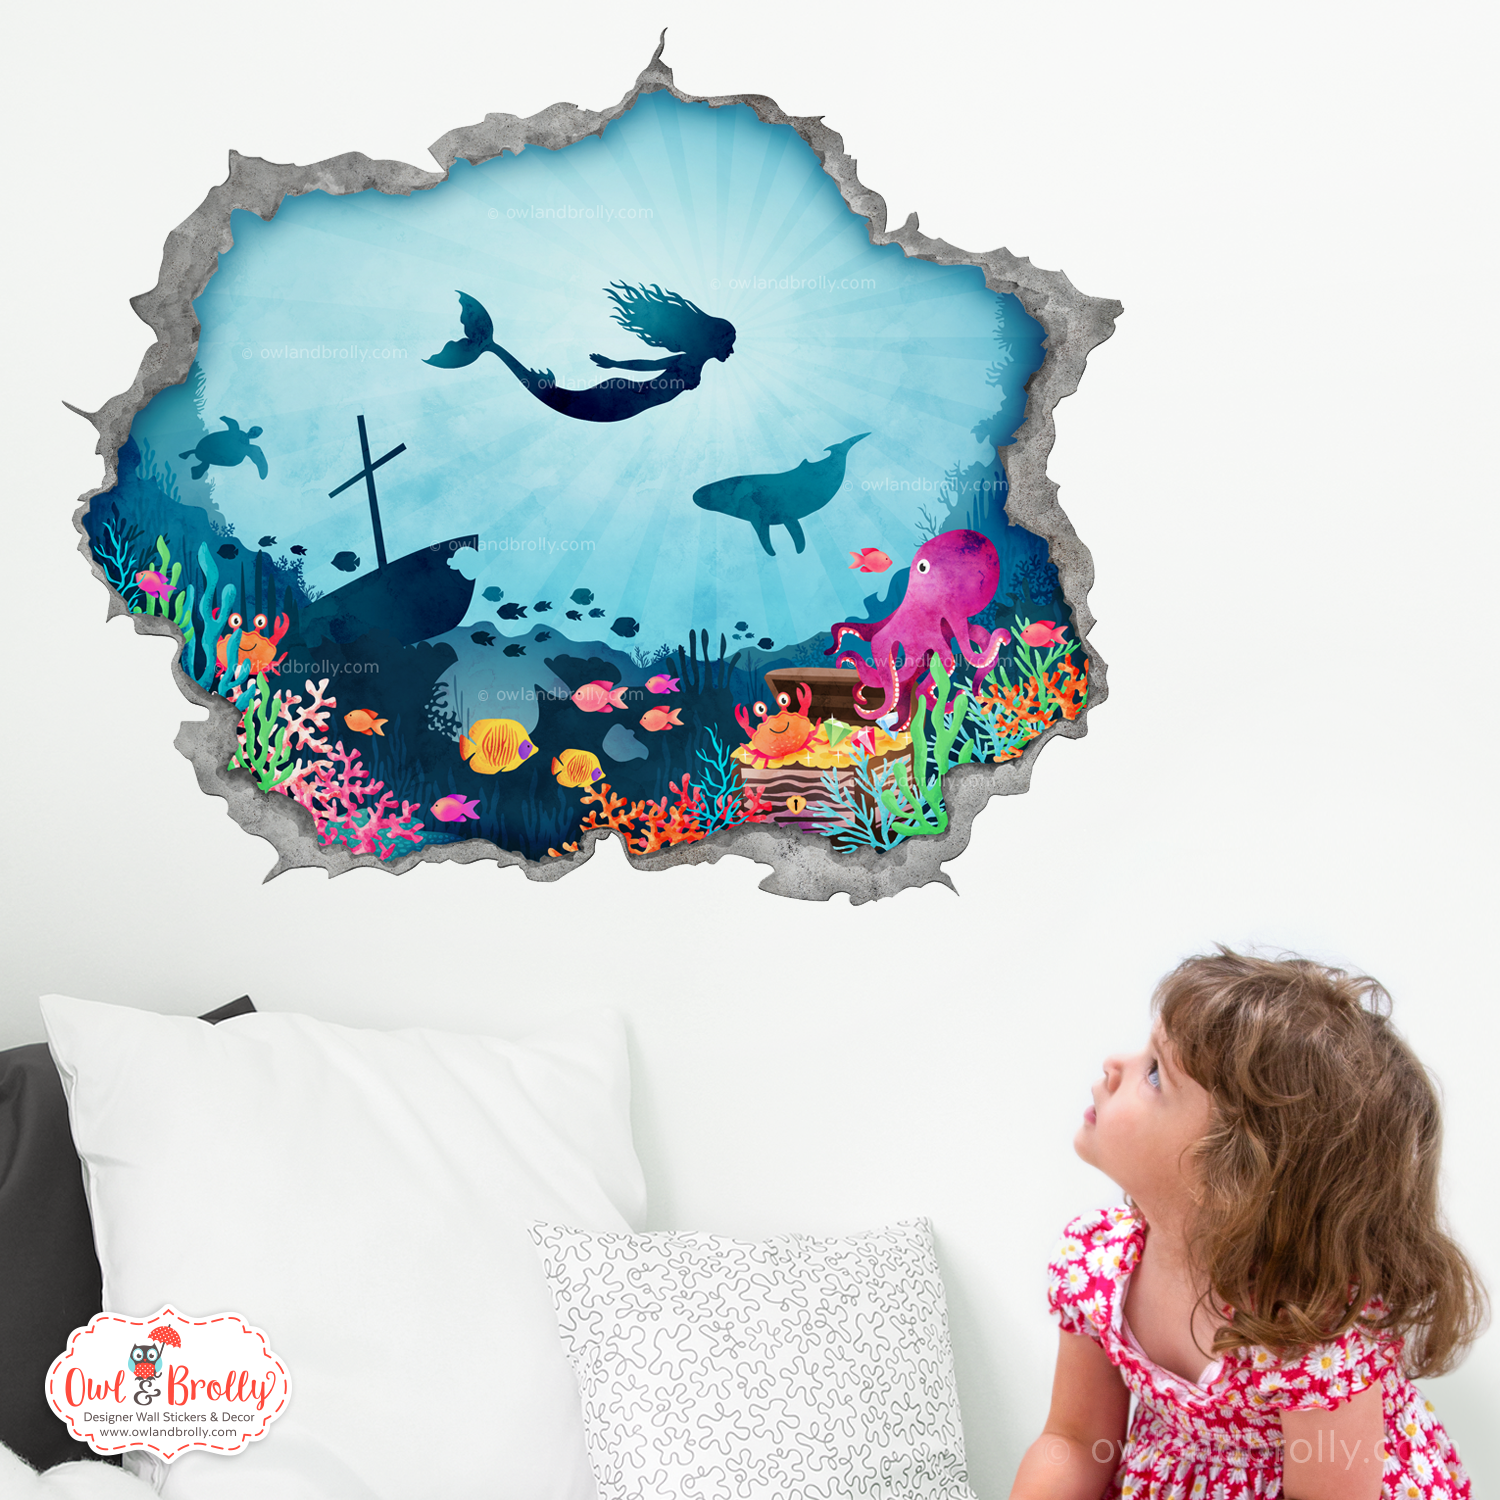 https://owlandbrolly.com/wp-content/uploads/2021/08/mermaid-hole-in-the-wall-portal-wall-sticker-decal-underwater-decor-by-owl-and-brolly.png